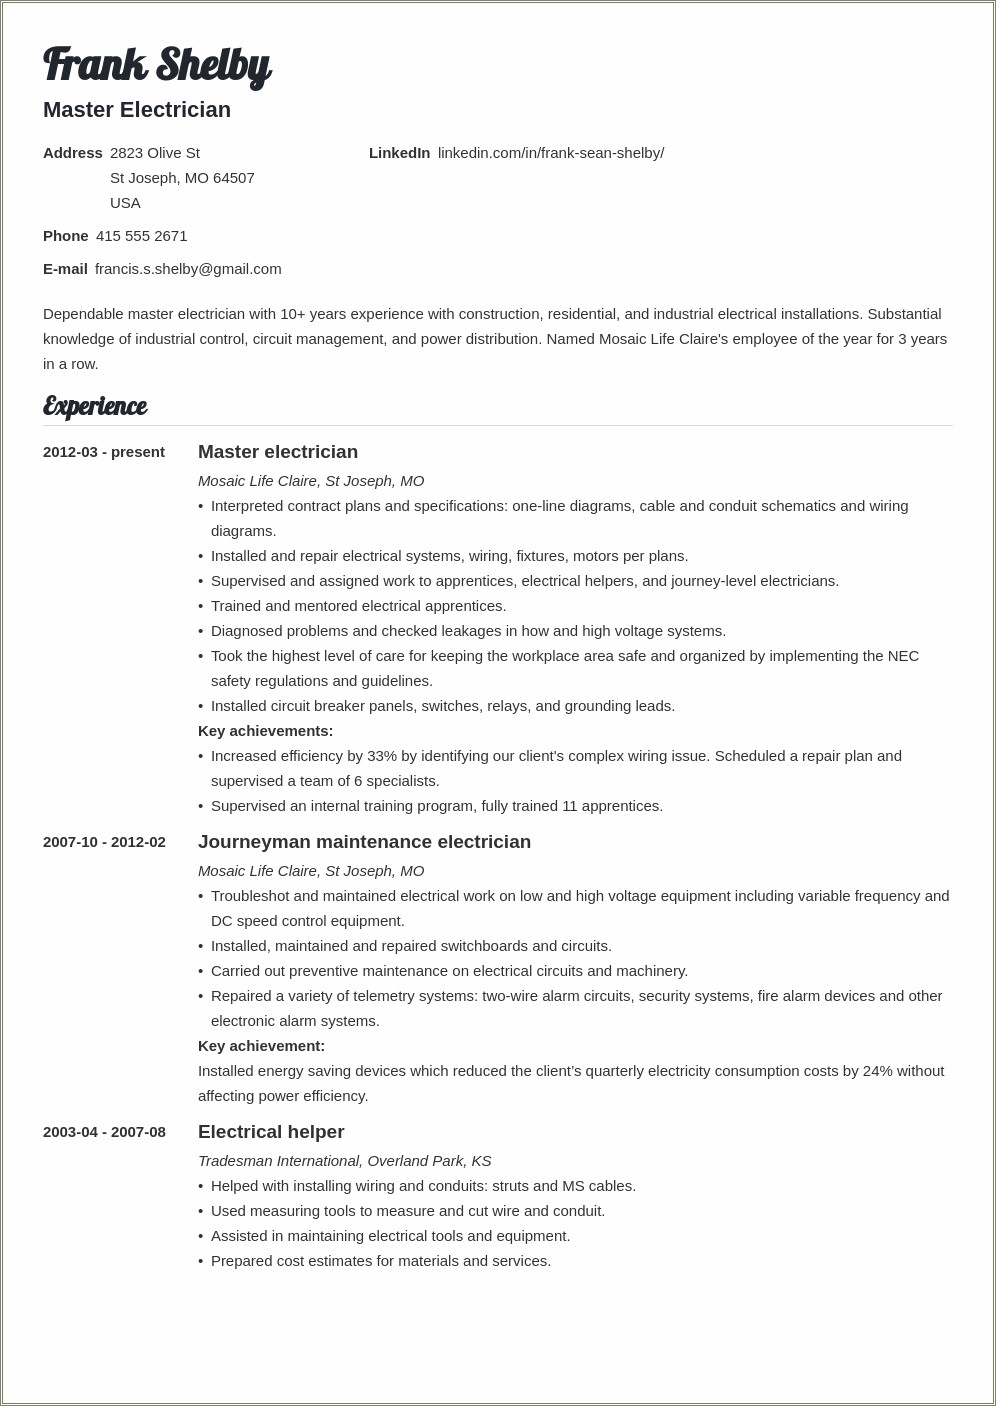 Management Resume Action Words For Help